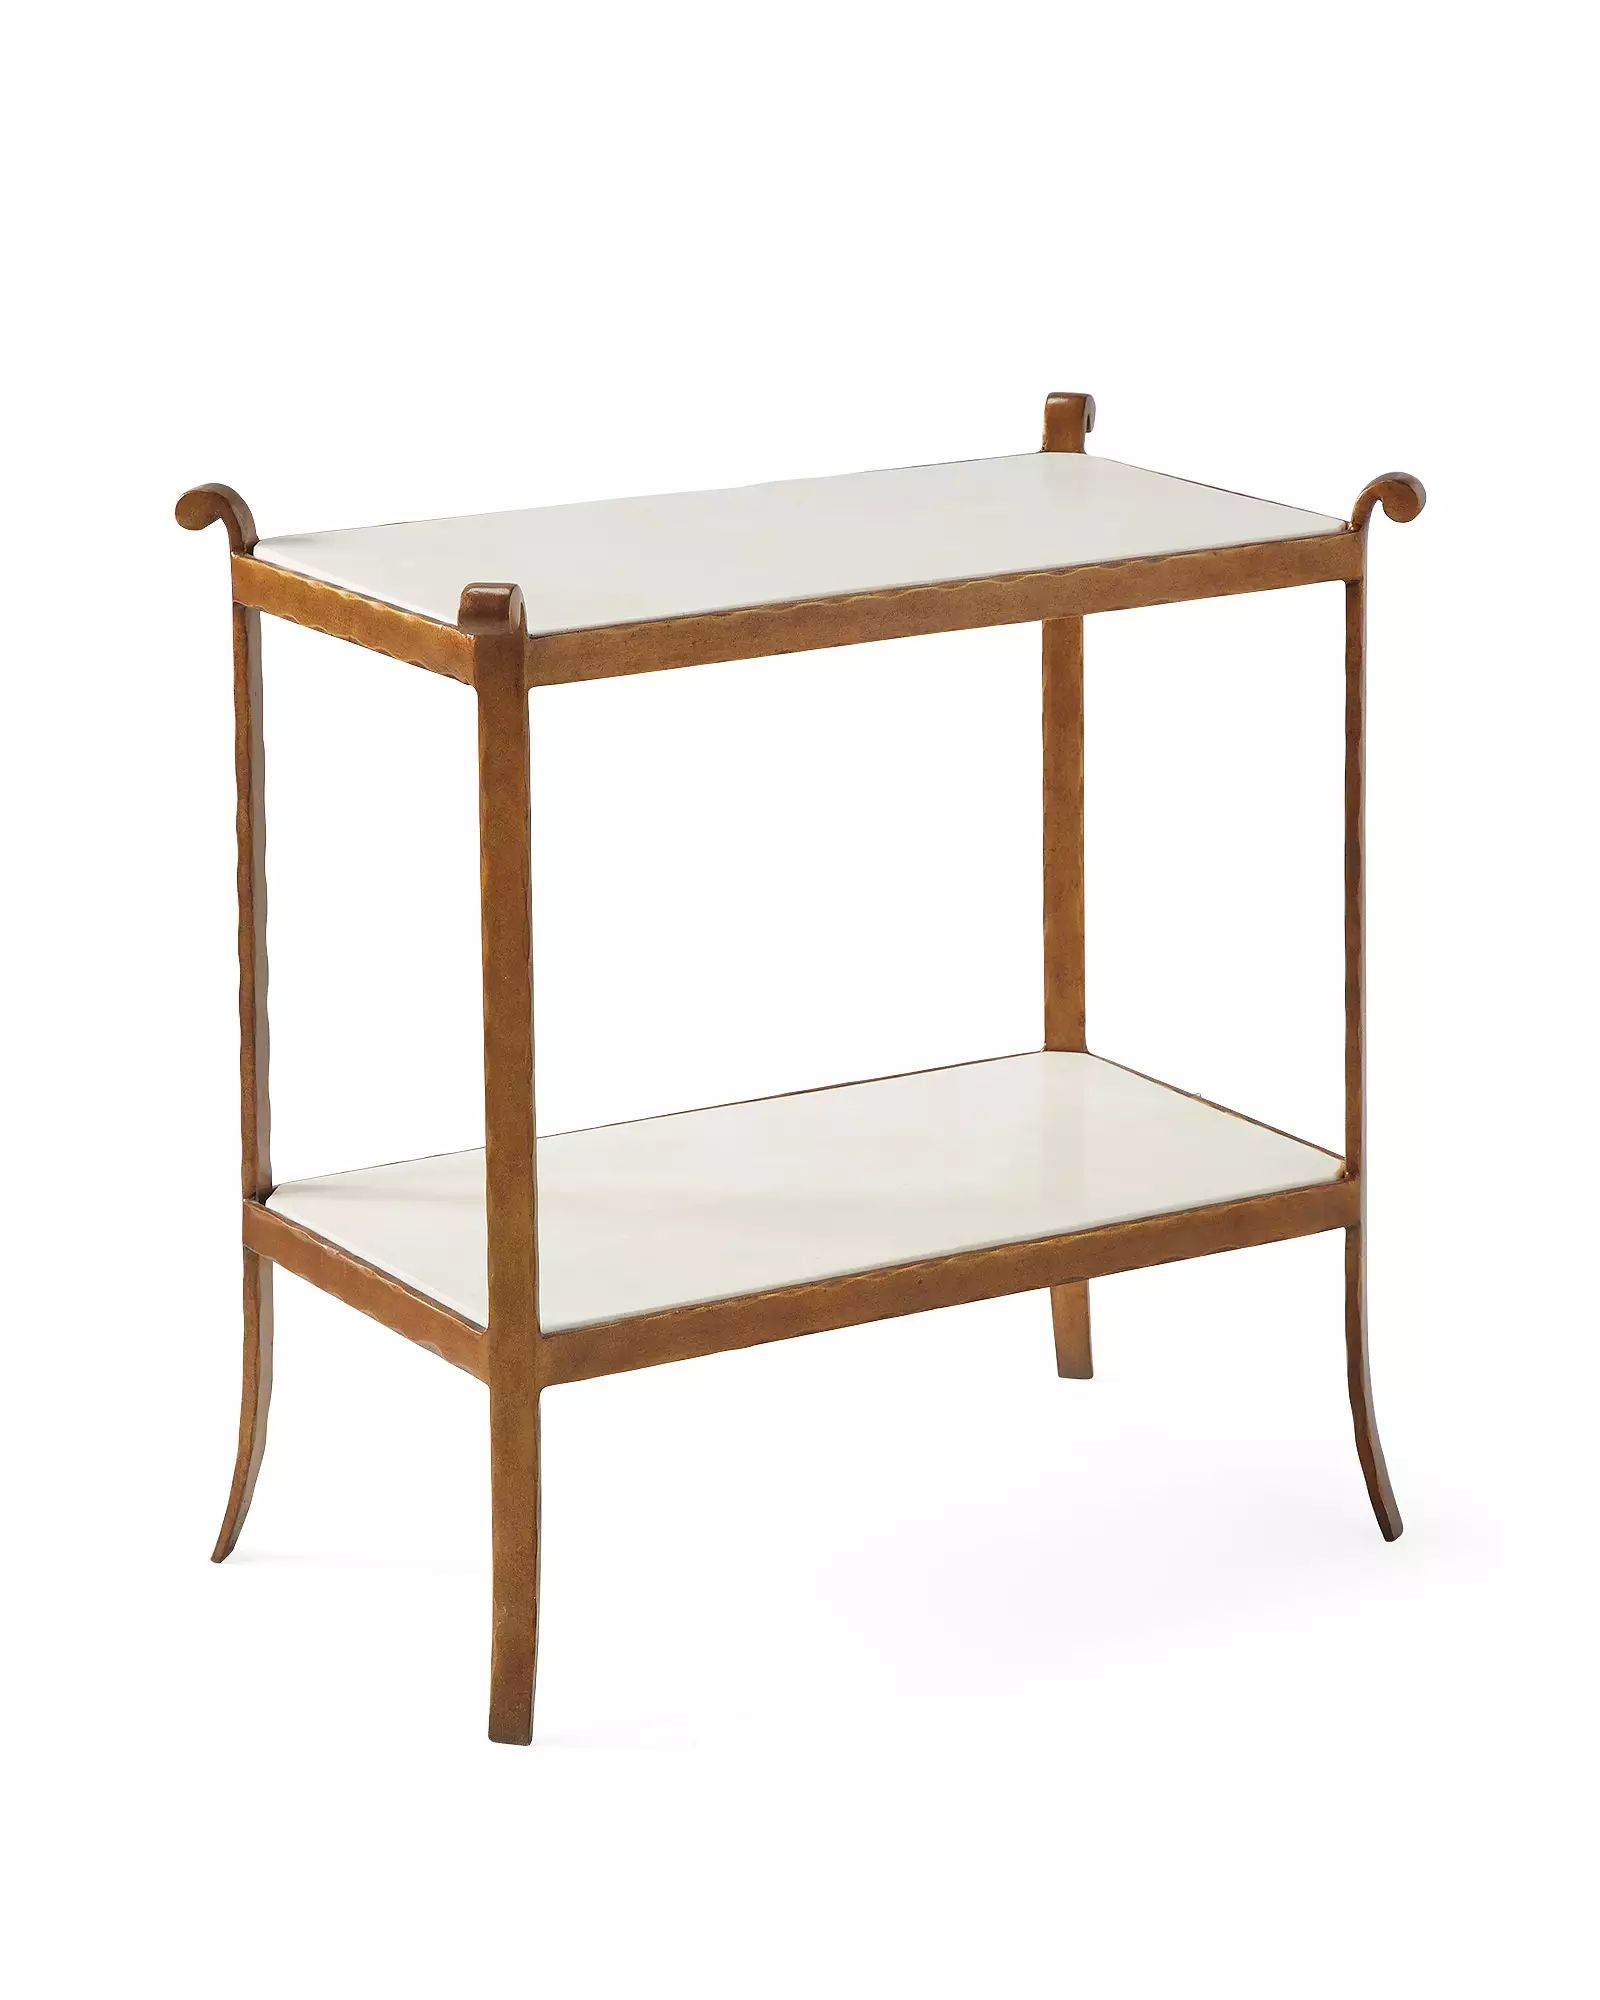 St. Germain Stone Side Table | Serena and Lily